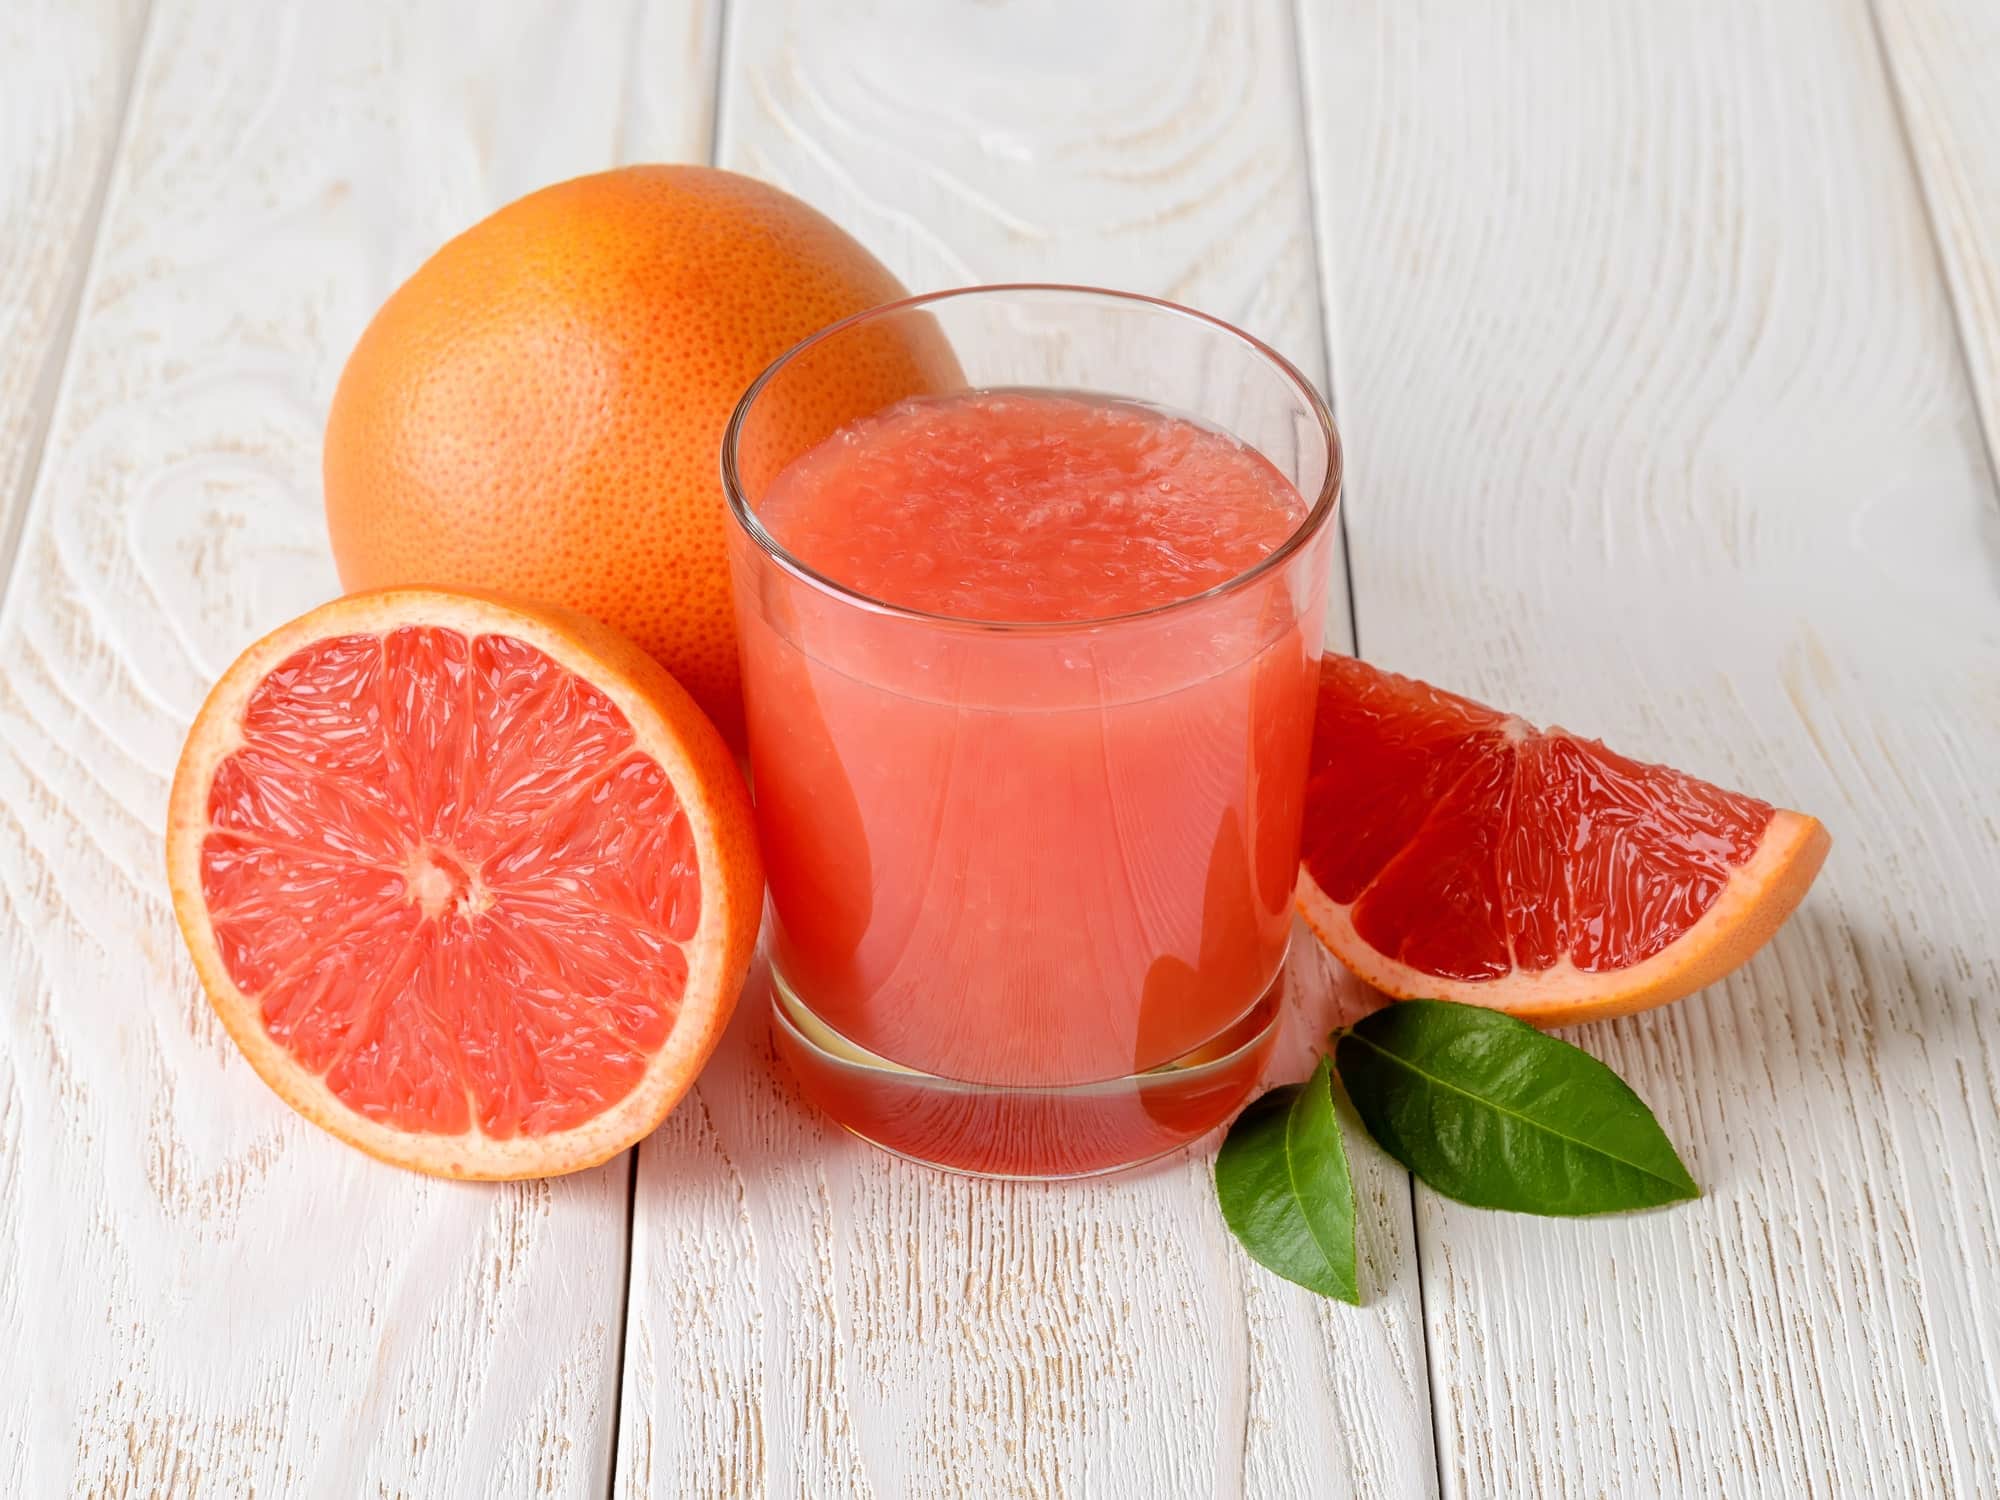 Why are grapefruit juice and poppy seeds banned foods in clinical trials?